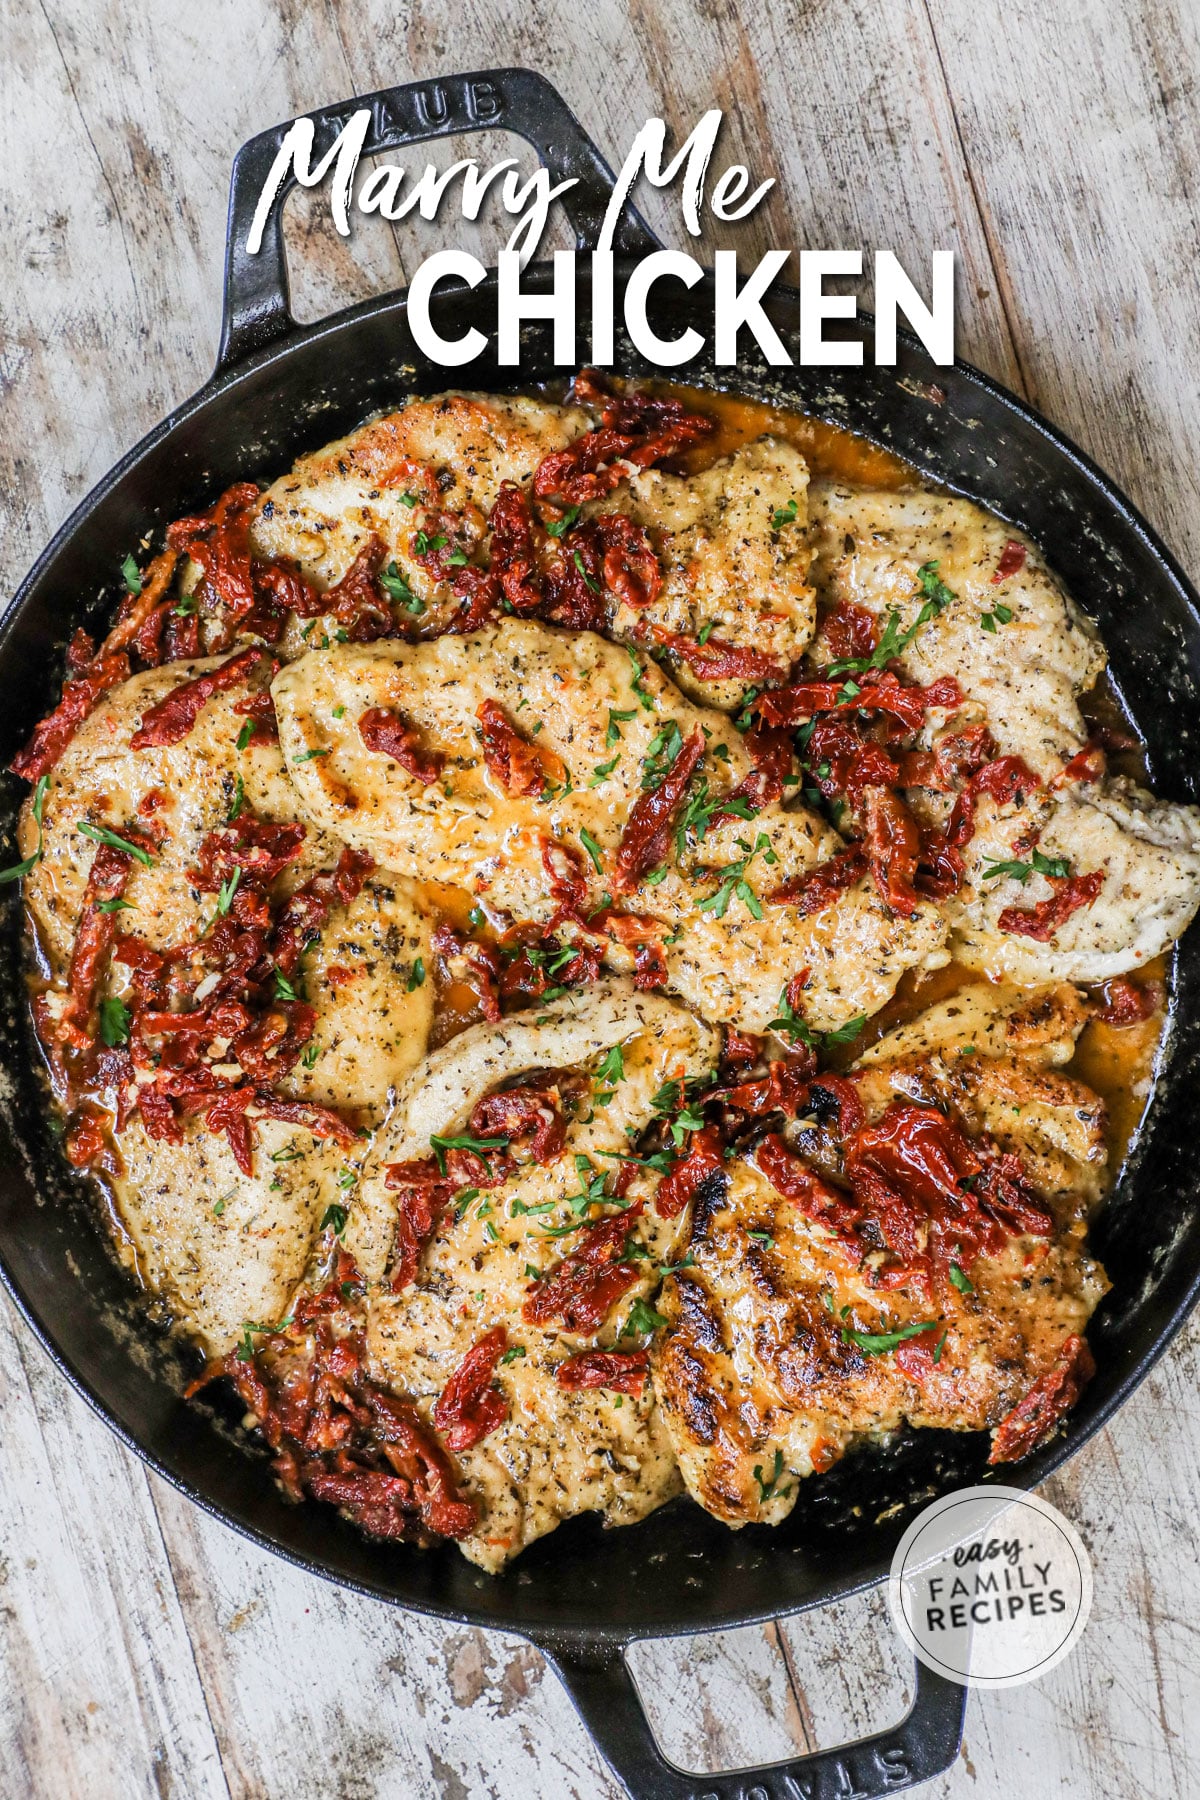 Picture has a pan full of marry chicken with a creamy sauce and sun-dried tomatoes and basil. 